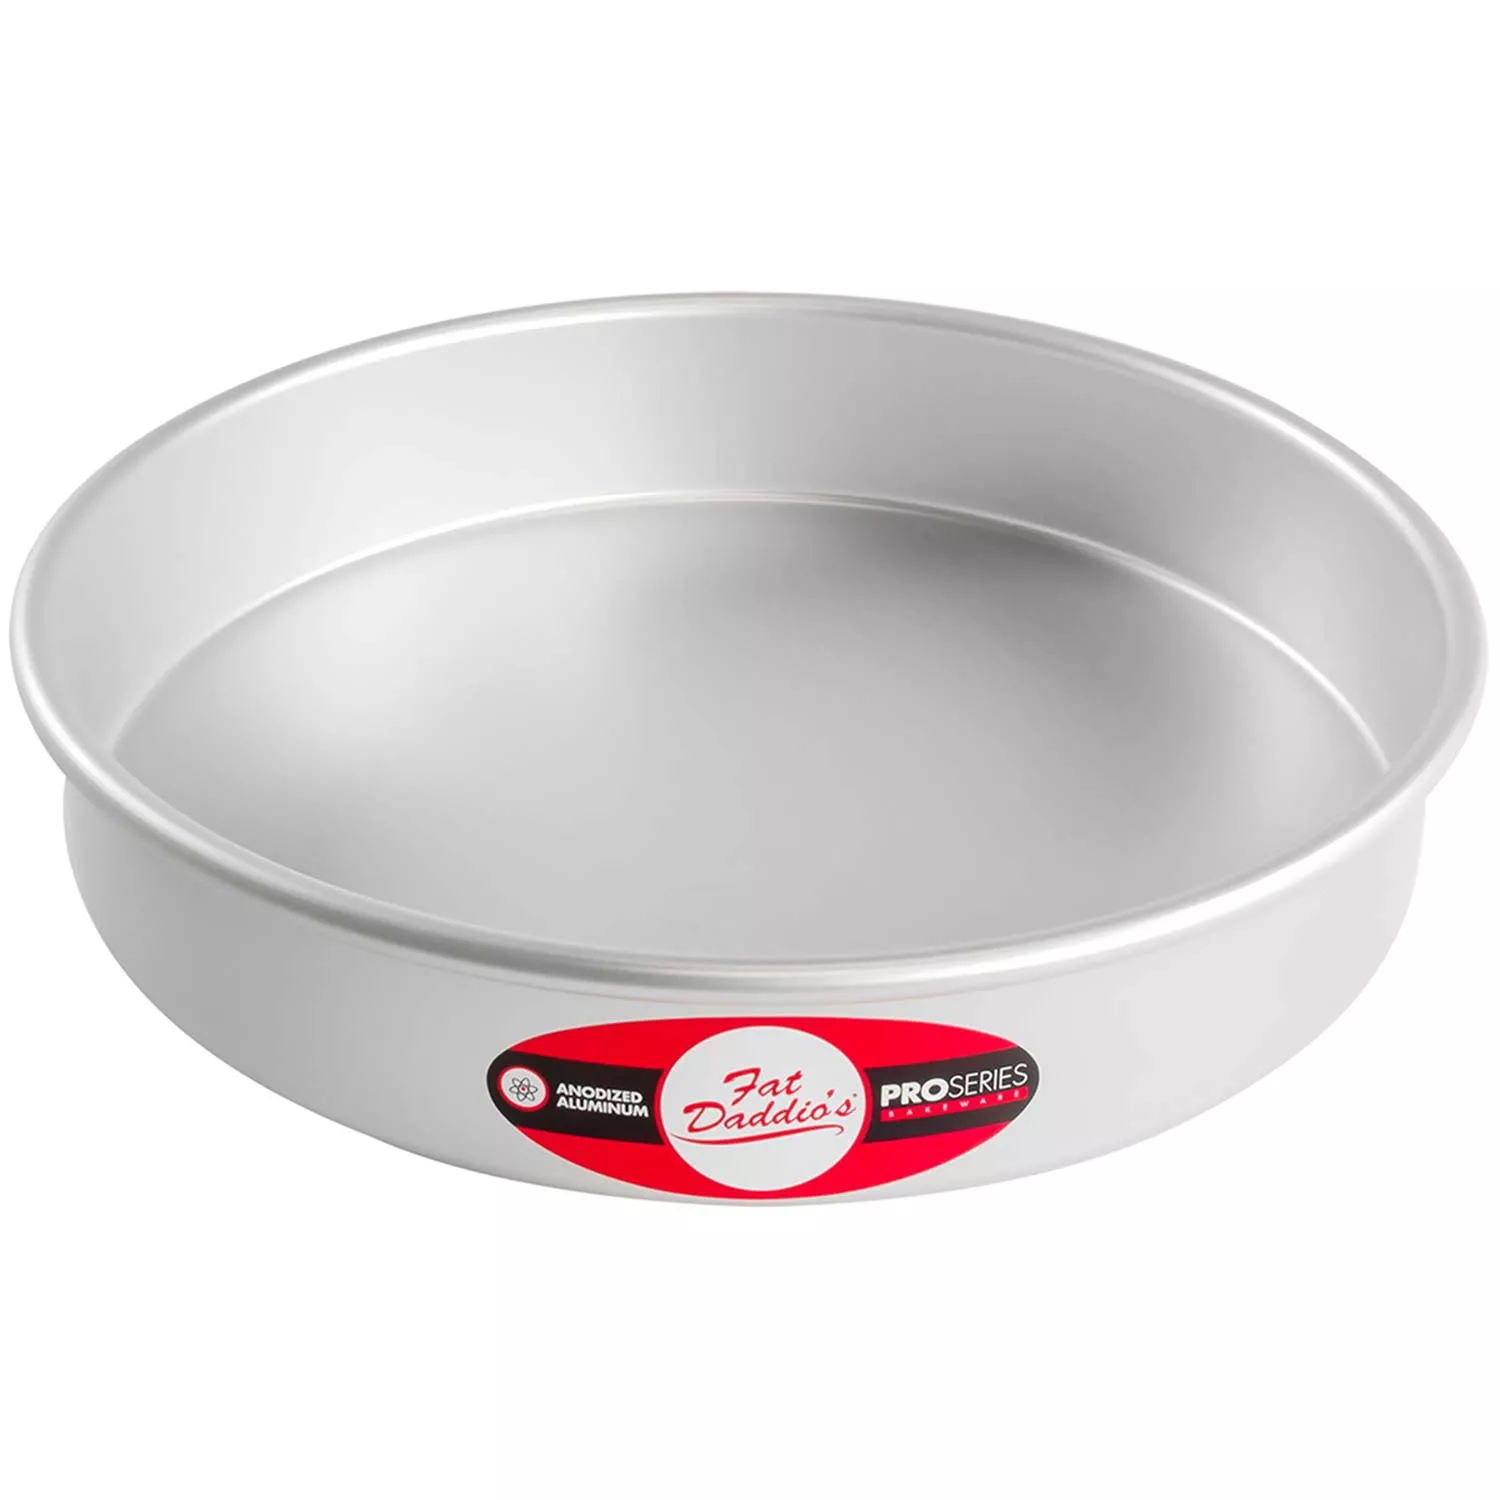 Fat Daddio's Bread Pan - 6 3/8 x 3 3/4 x 2 3/4 - Spoons N Spice